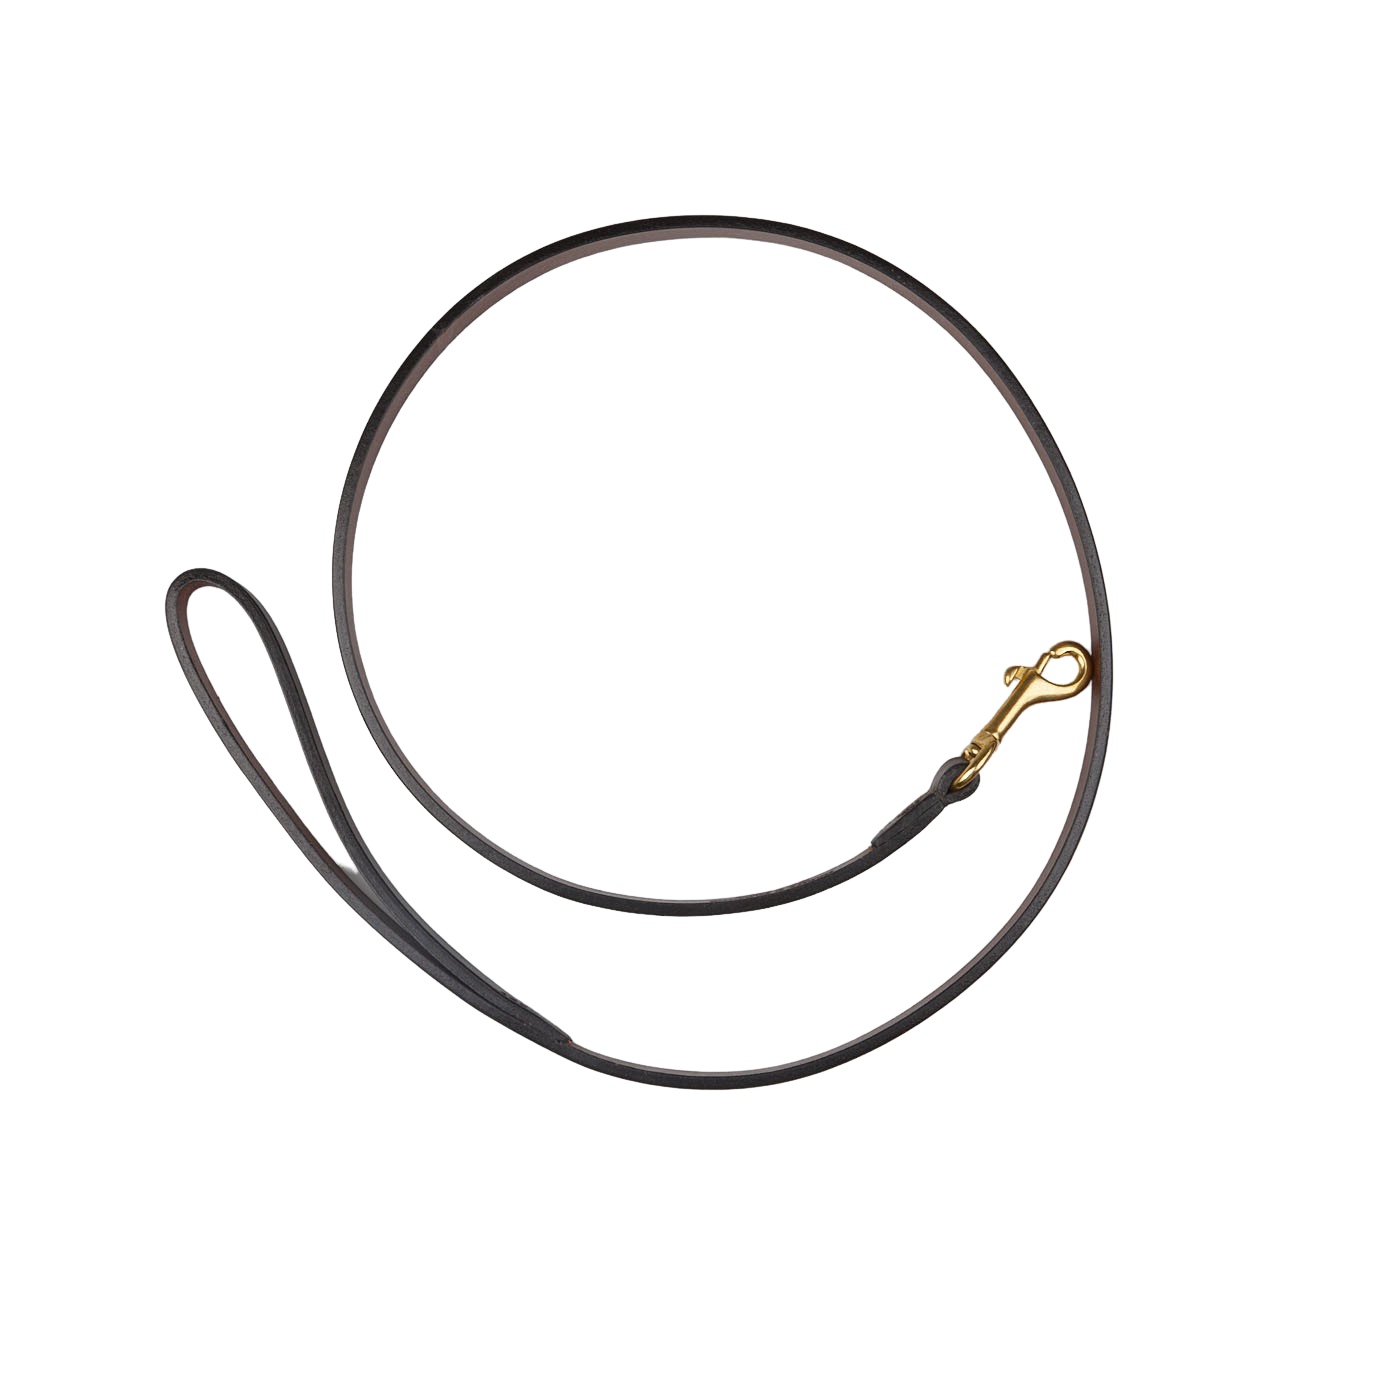 A Dark Brown Saddle Leather Dog Leash with a gold hook, made by Hardy & Parsons.